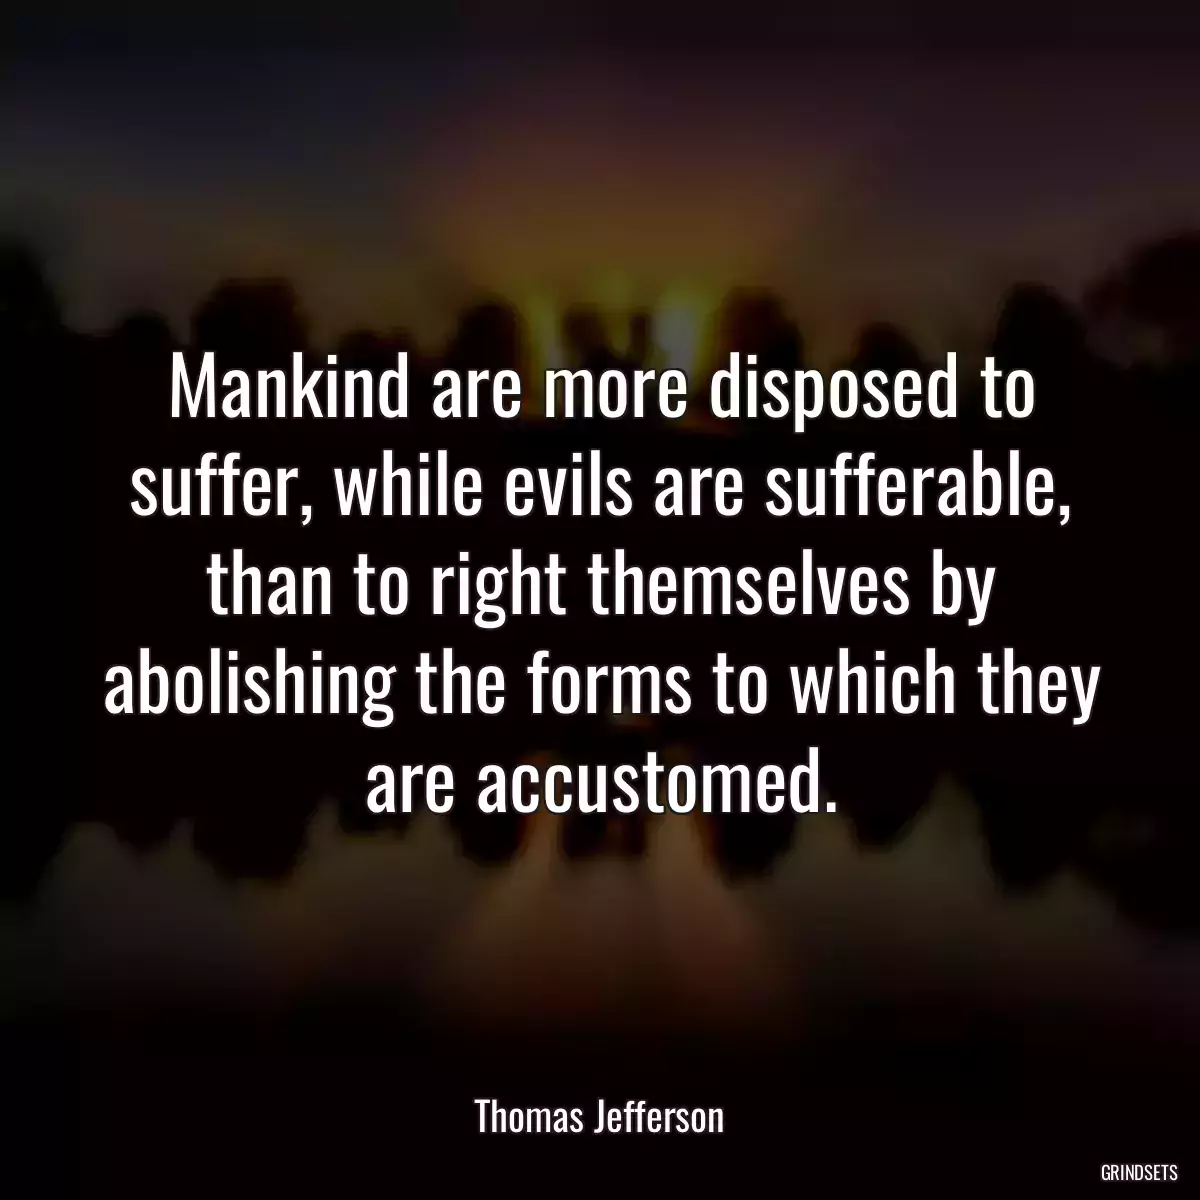 Mankind are more disposed to suffer, while evils are sufferable, than to right themselves by abolishing the forms to which they are accustomed.